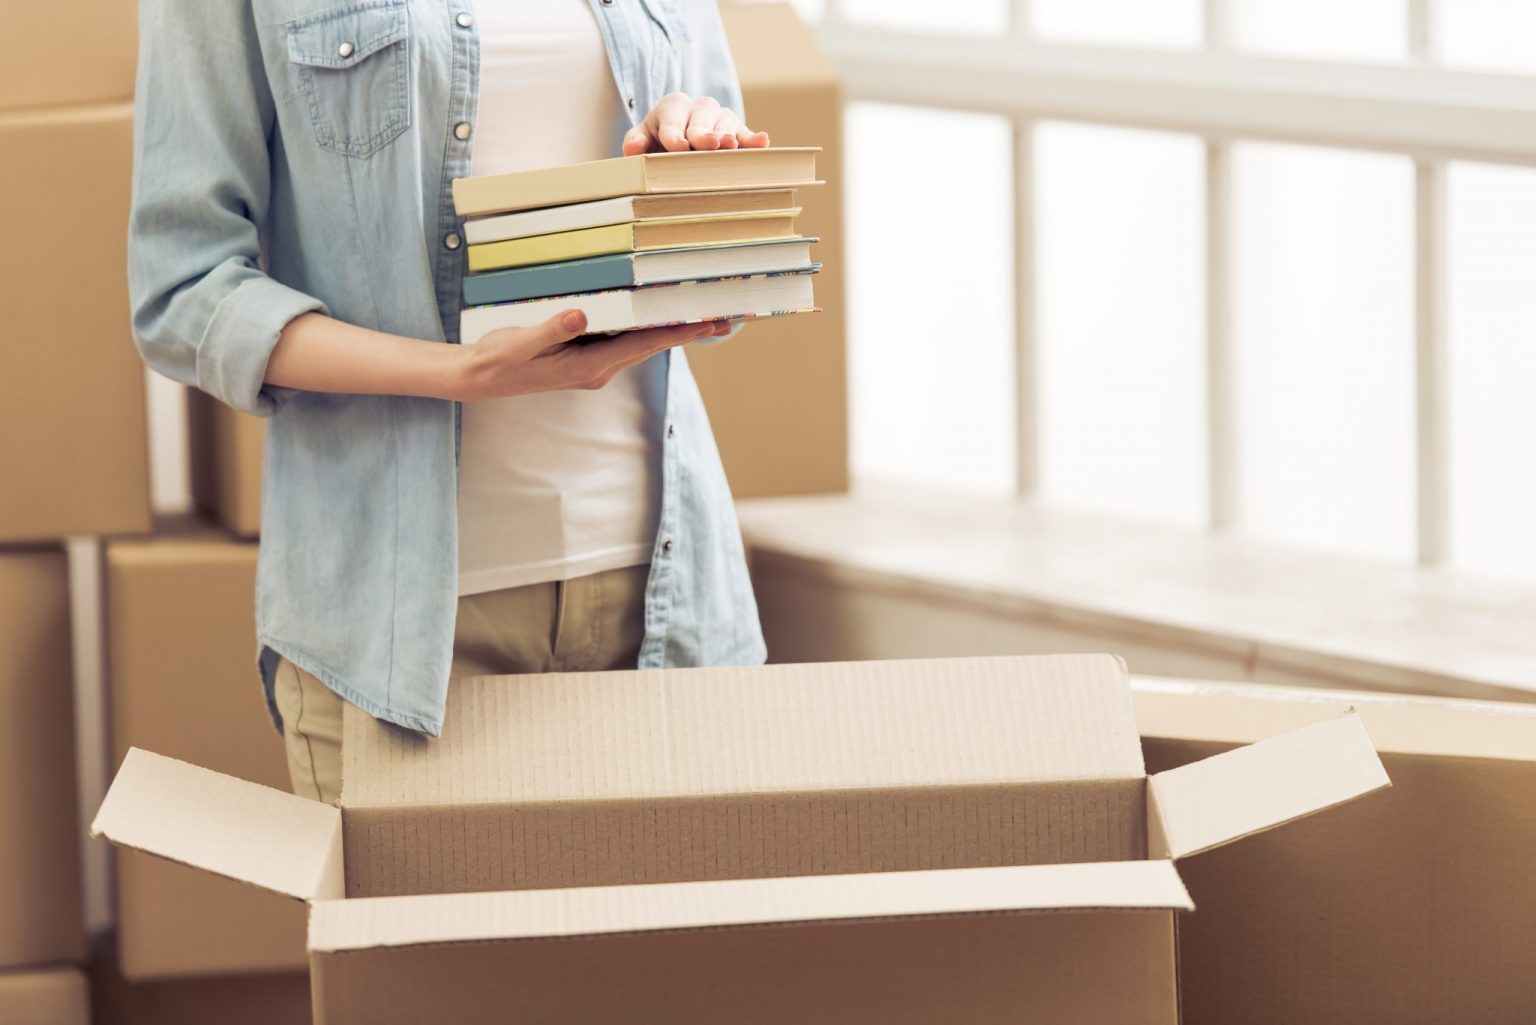 A Millennial Guide To Saving Up To Move Out in 2023?